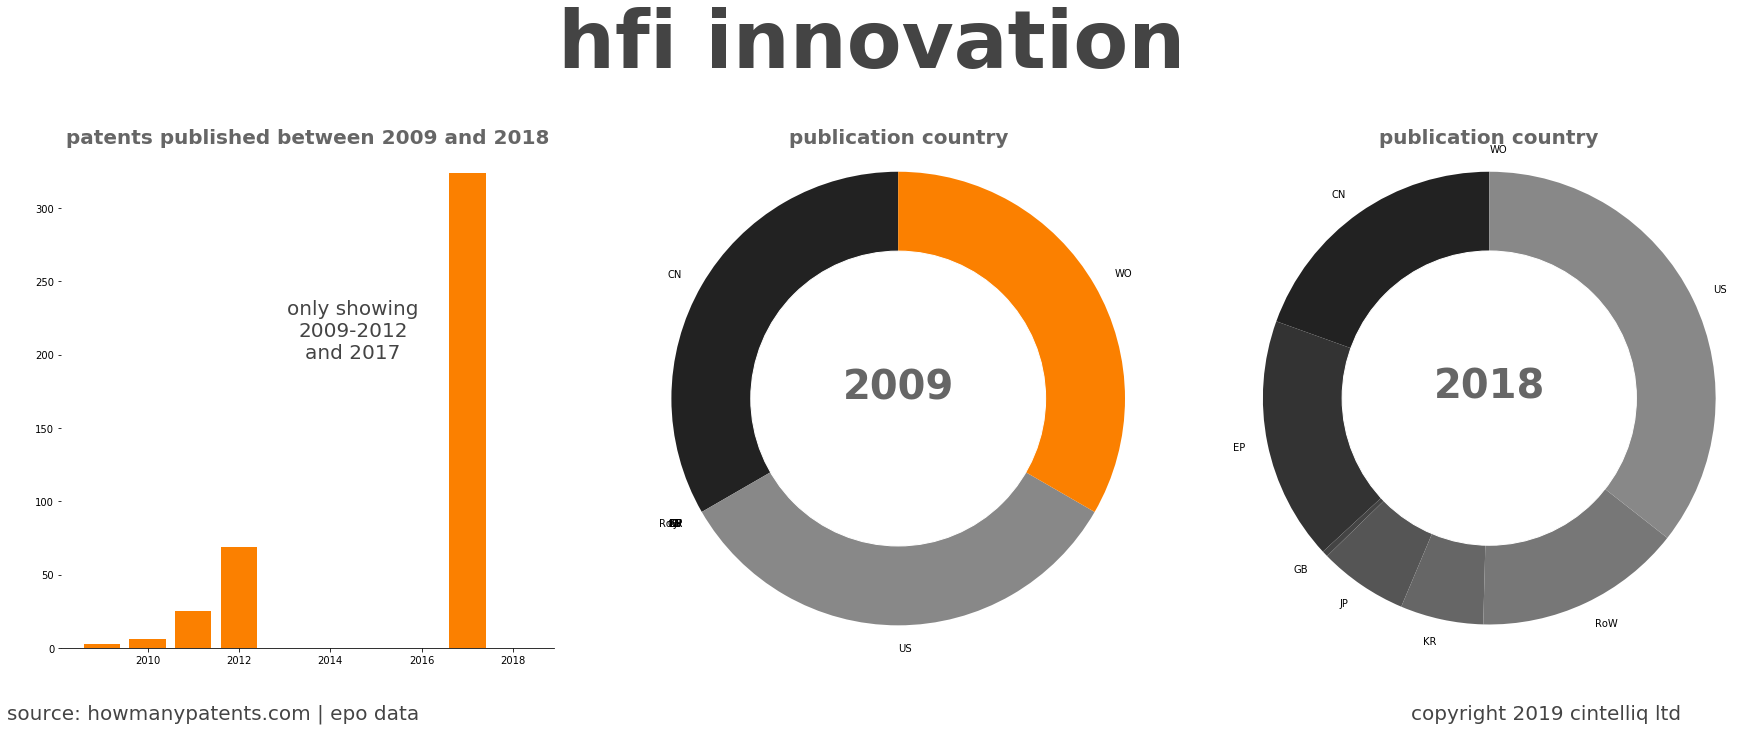 summary of patents for Hfi Innovation